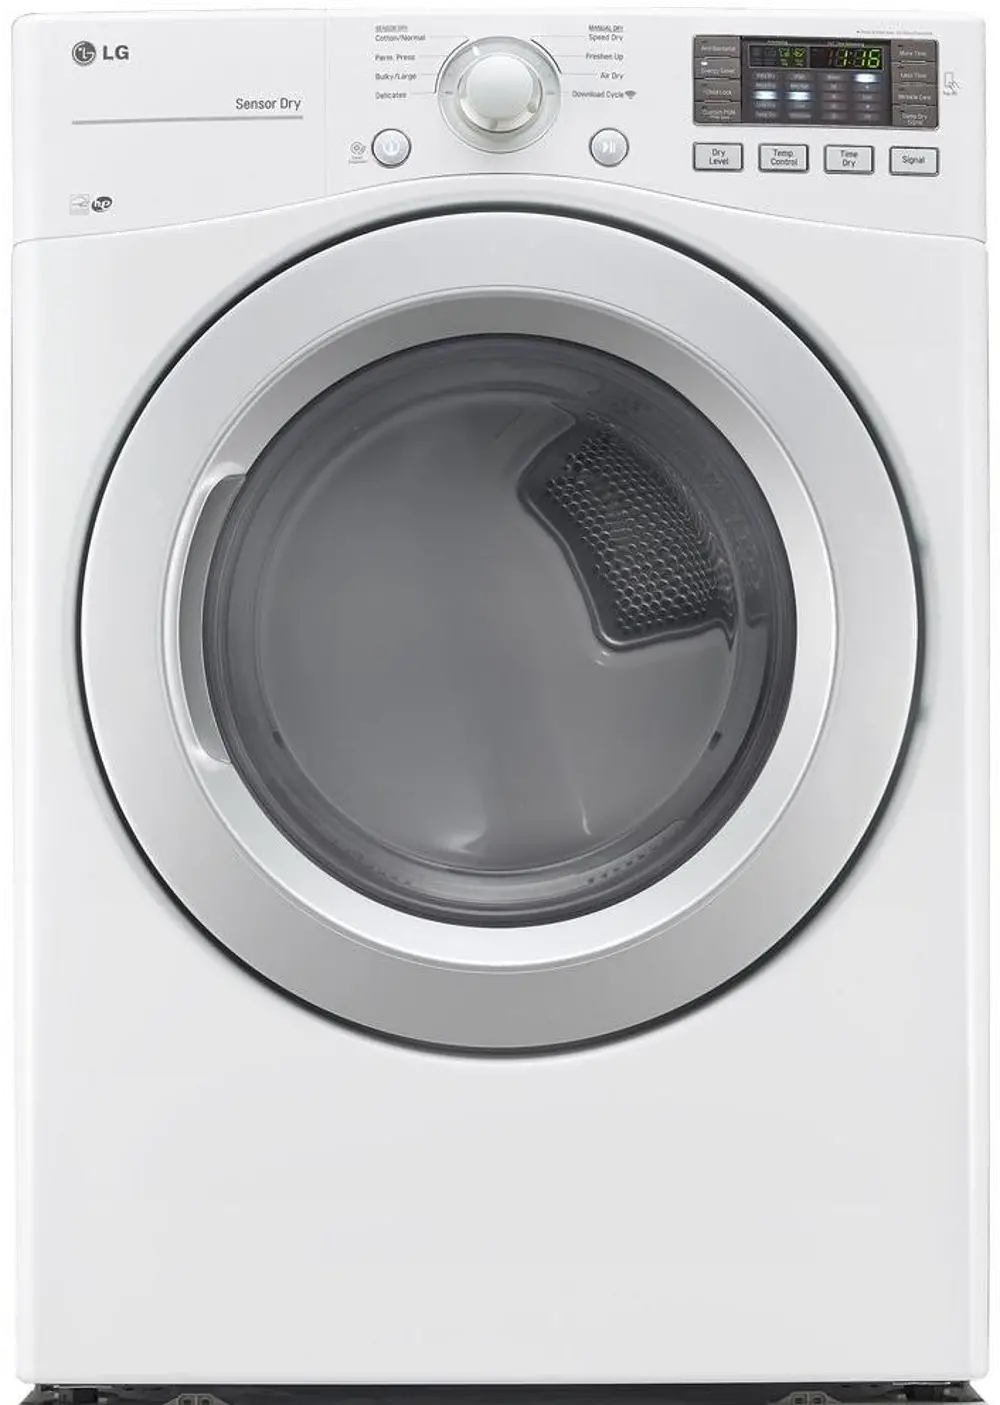 DLE3170W LG Electric Dryer with Sensor Dry - 7.4 cu. ft.  White-1